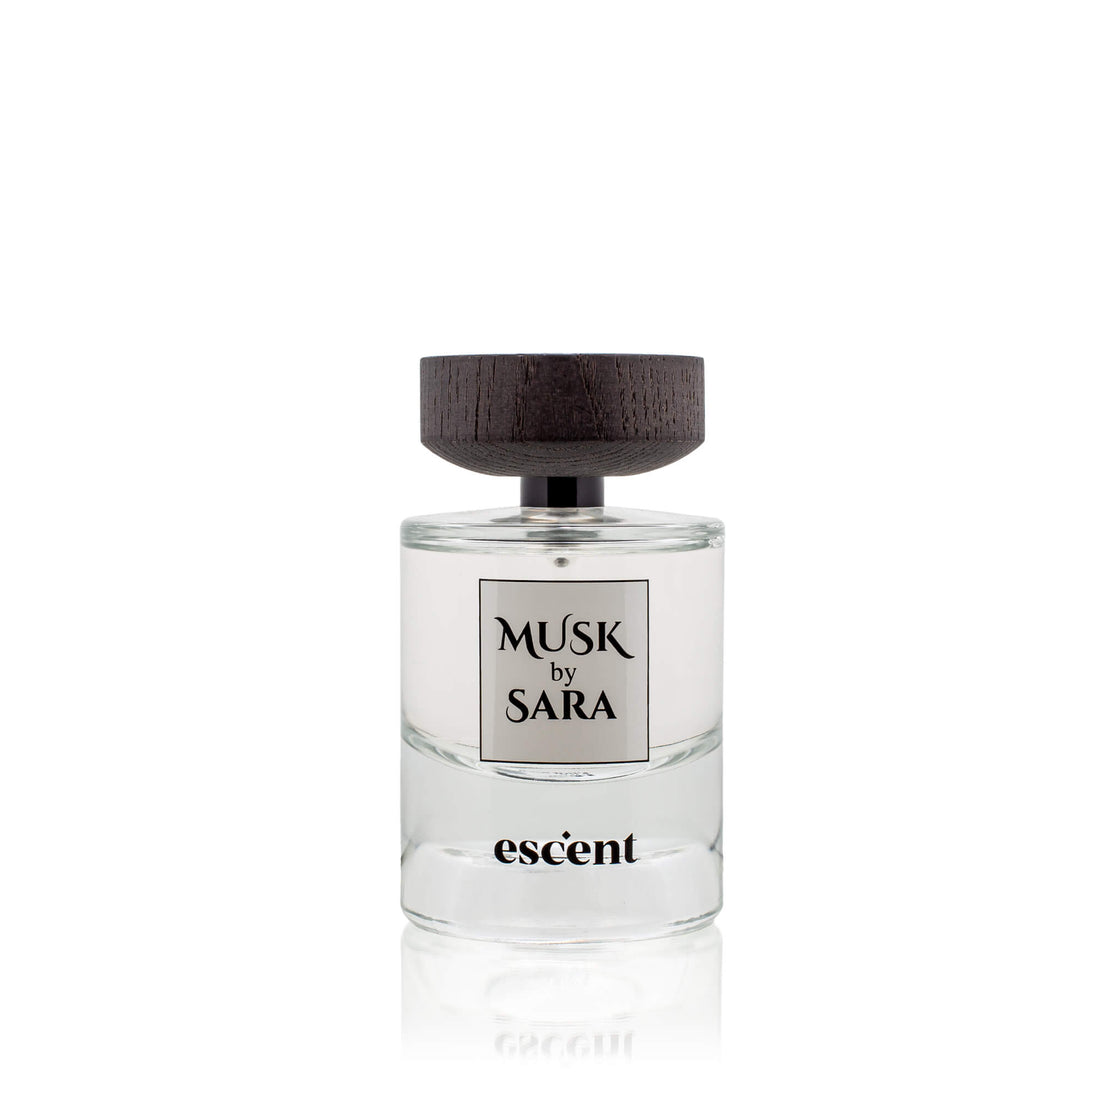 MUSK BY SARA 100ML - ESCENT